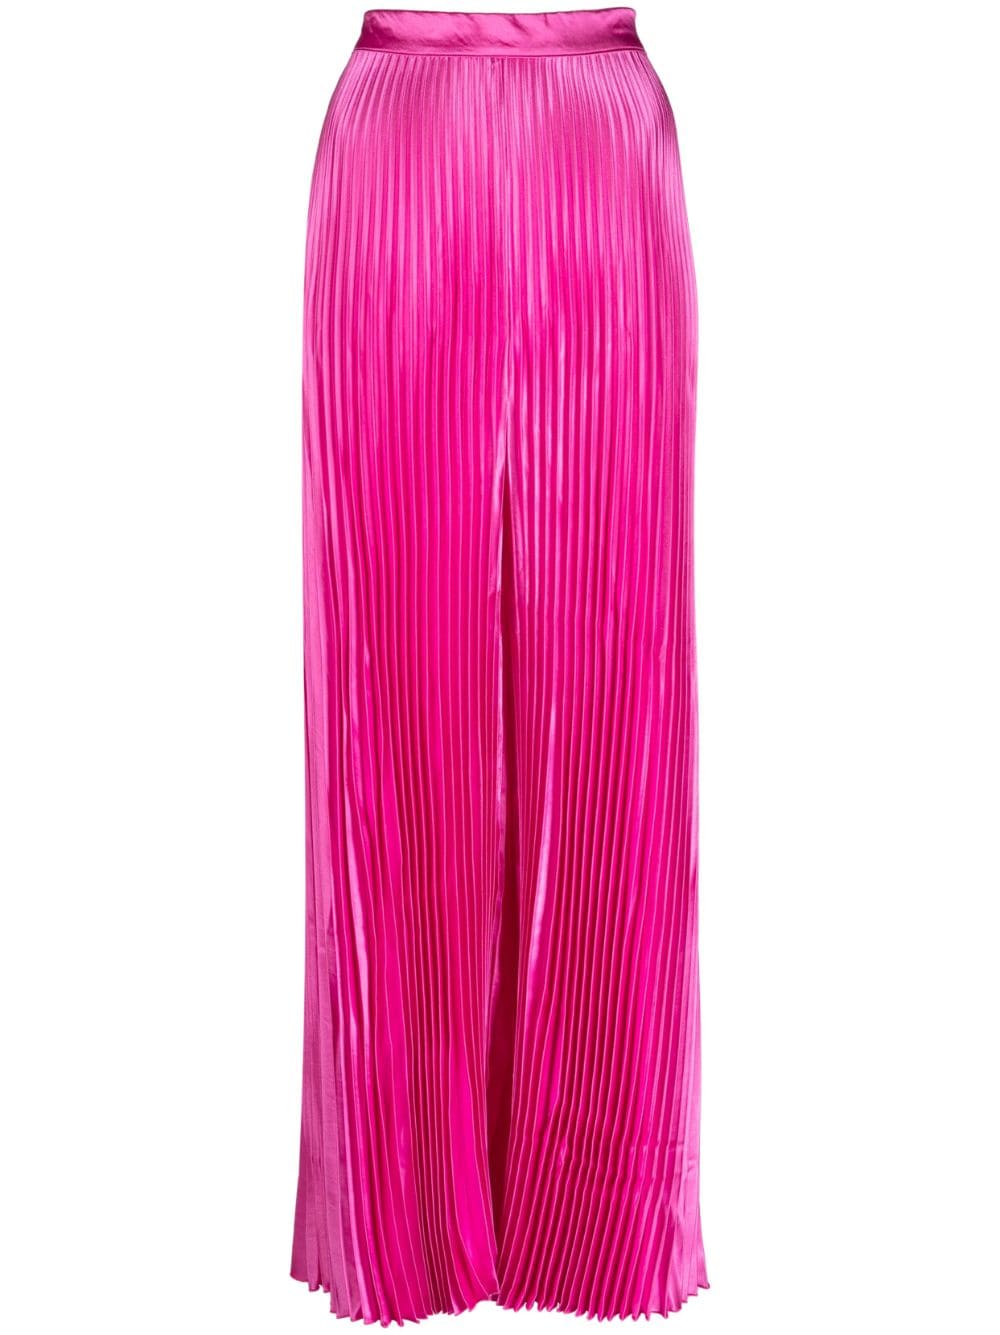 Image 1 of L'IDÉE pleated high-waisted trousers